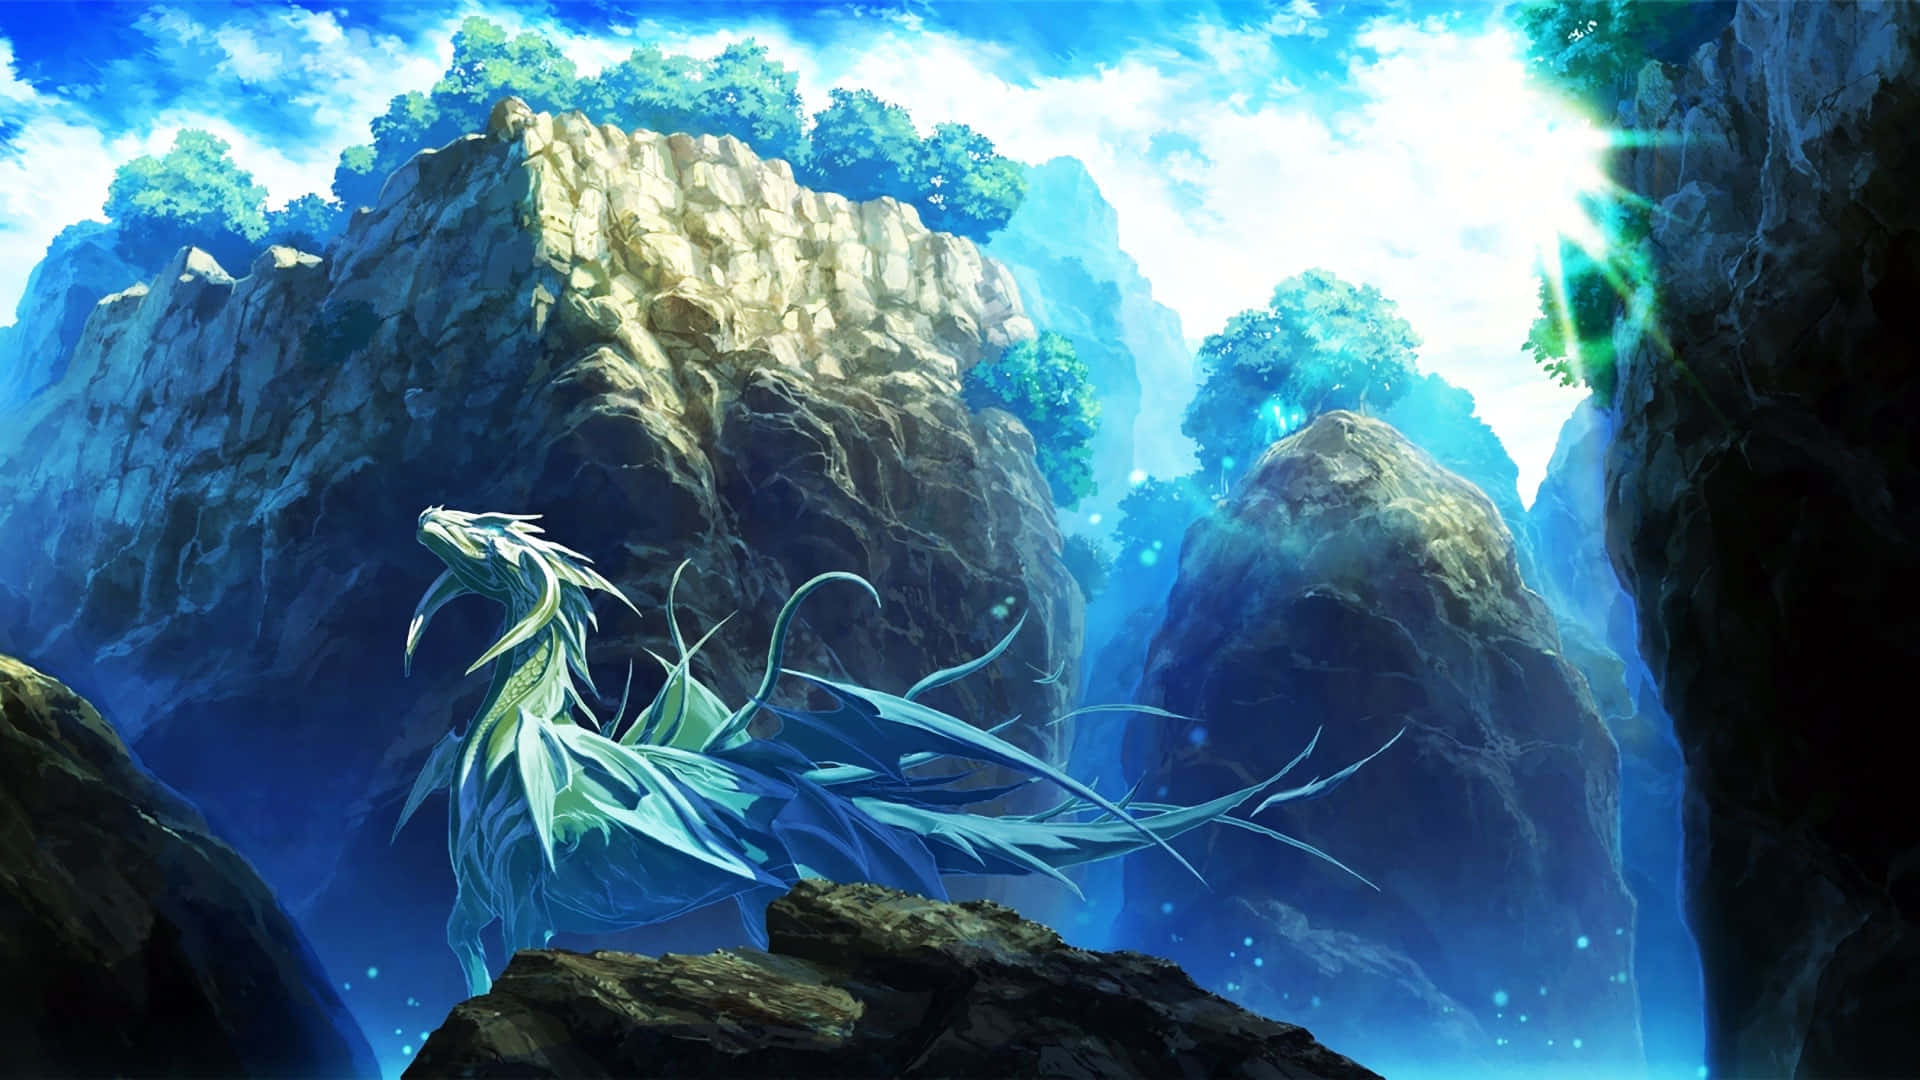 Ice Dragon Anime In The Mountains Wallpaper